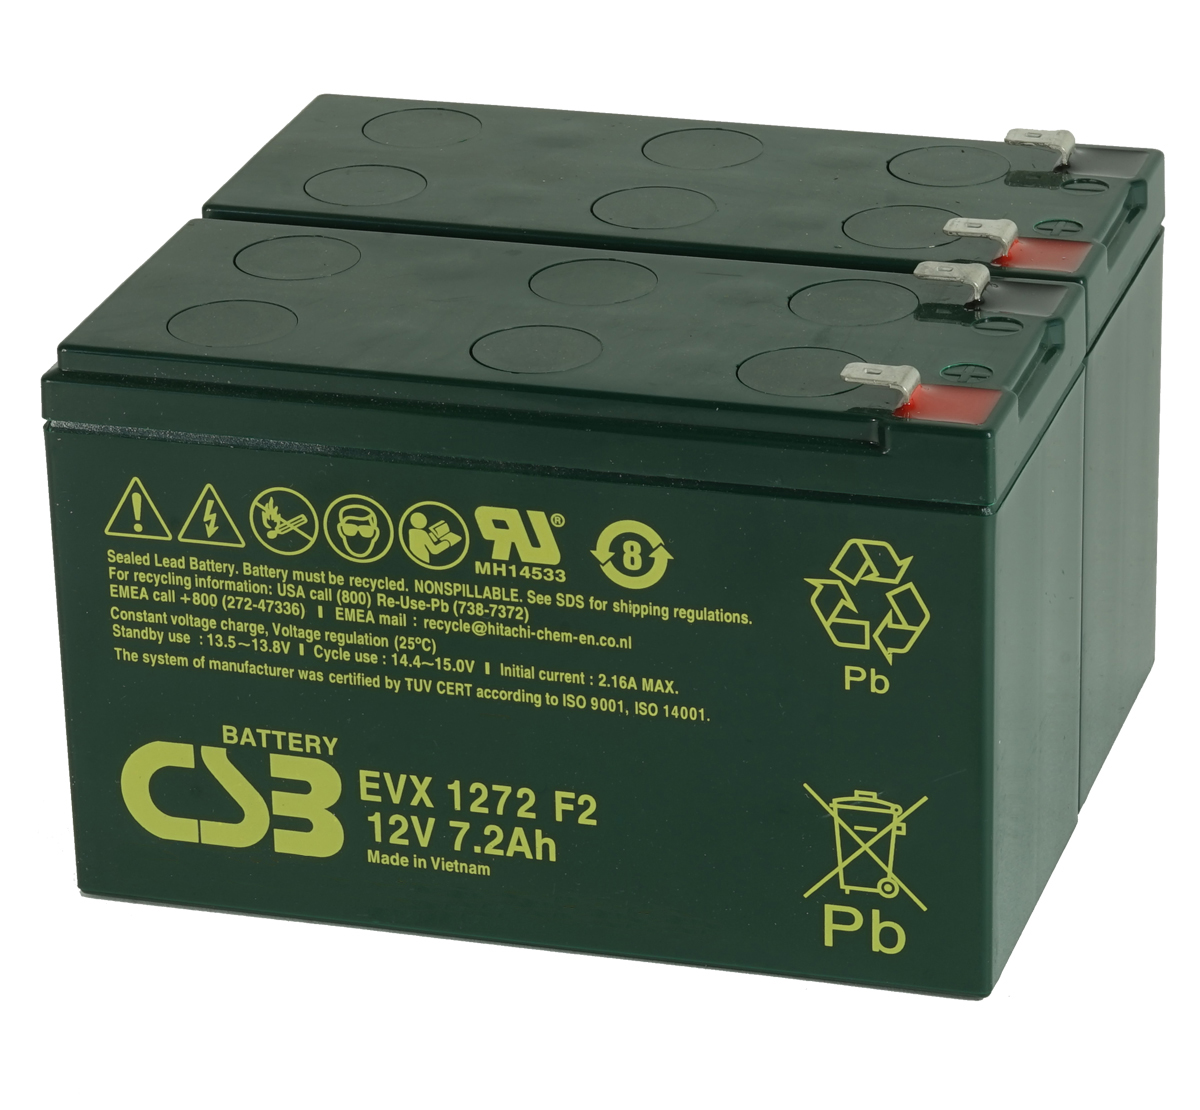 Pair of CSB EVX1272 F2 7.2V 12Ah Mobility Scooter Batteries